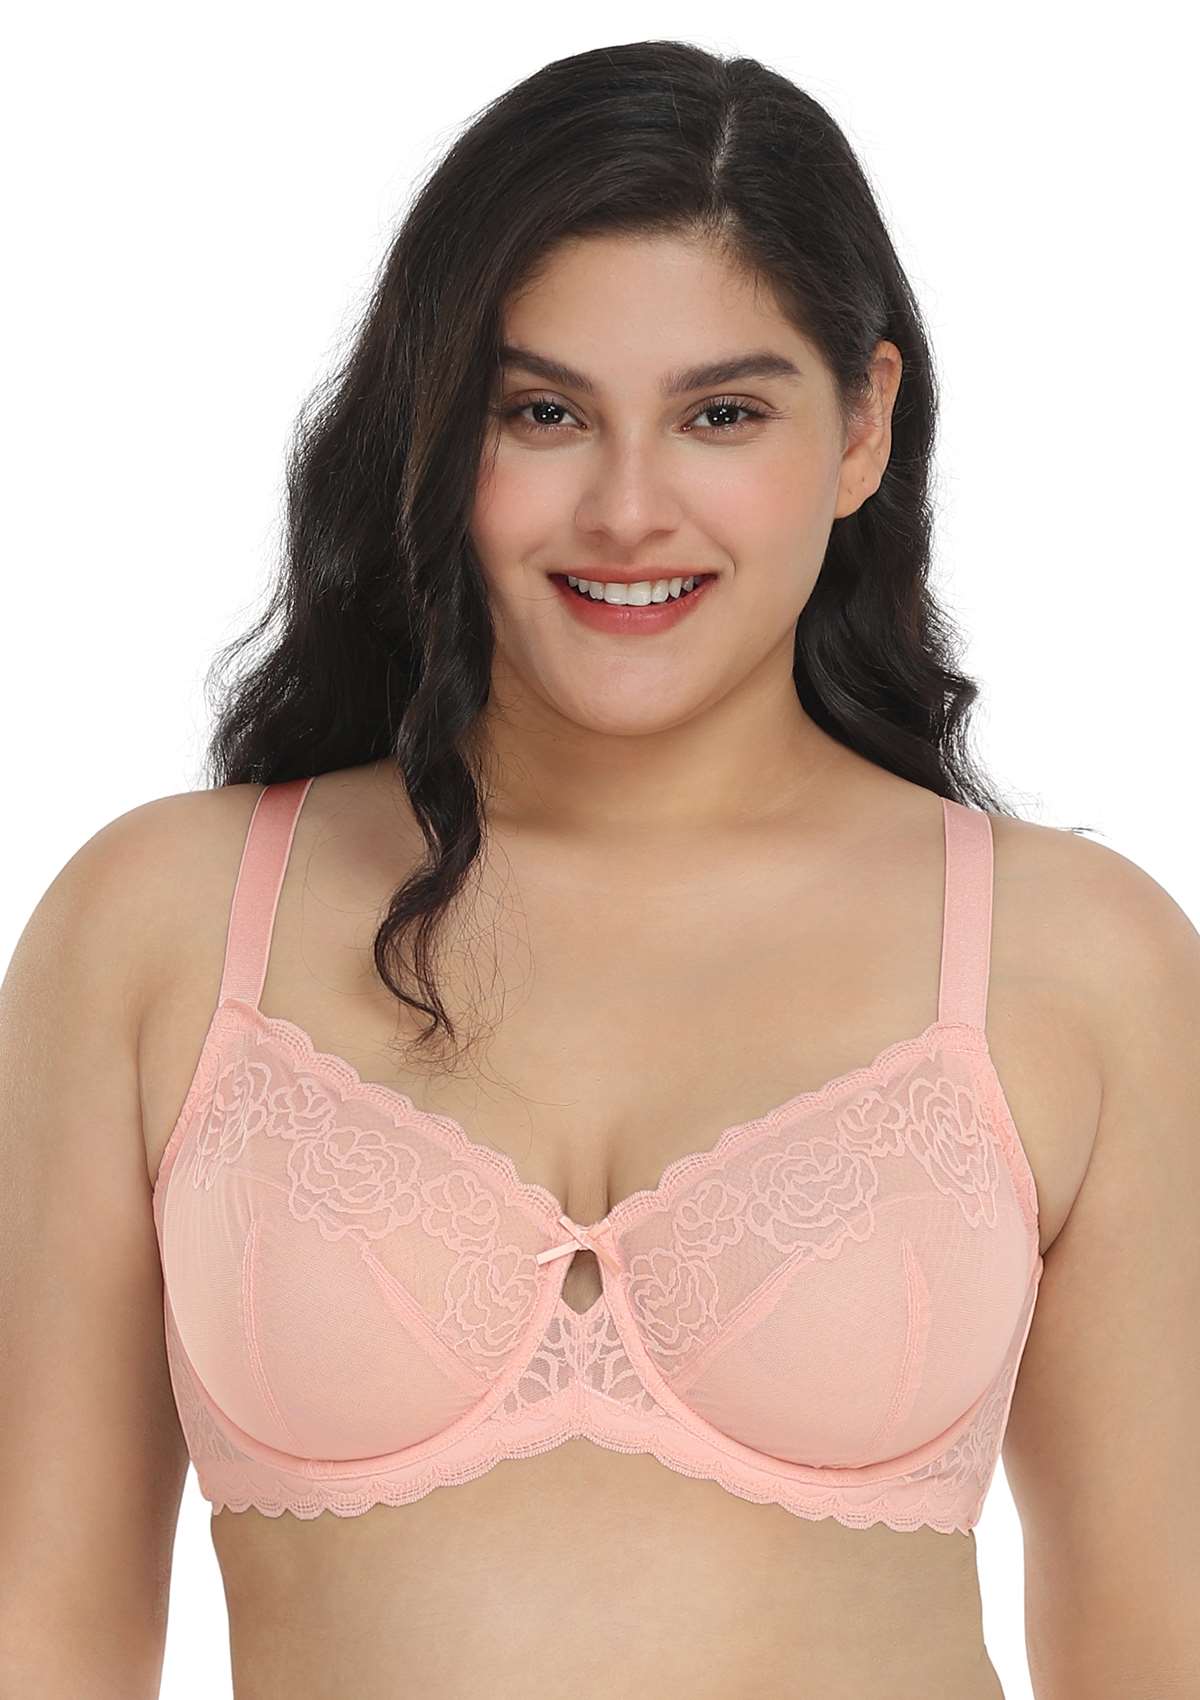 HSIA Rosa Bonica Sheer Lace Mesh Unlined Thin Comfy Woman Bra - Pink / 36 / C